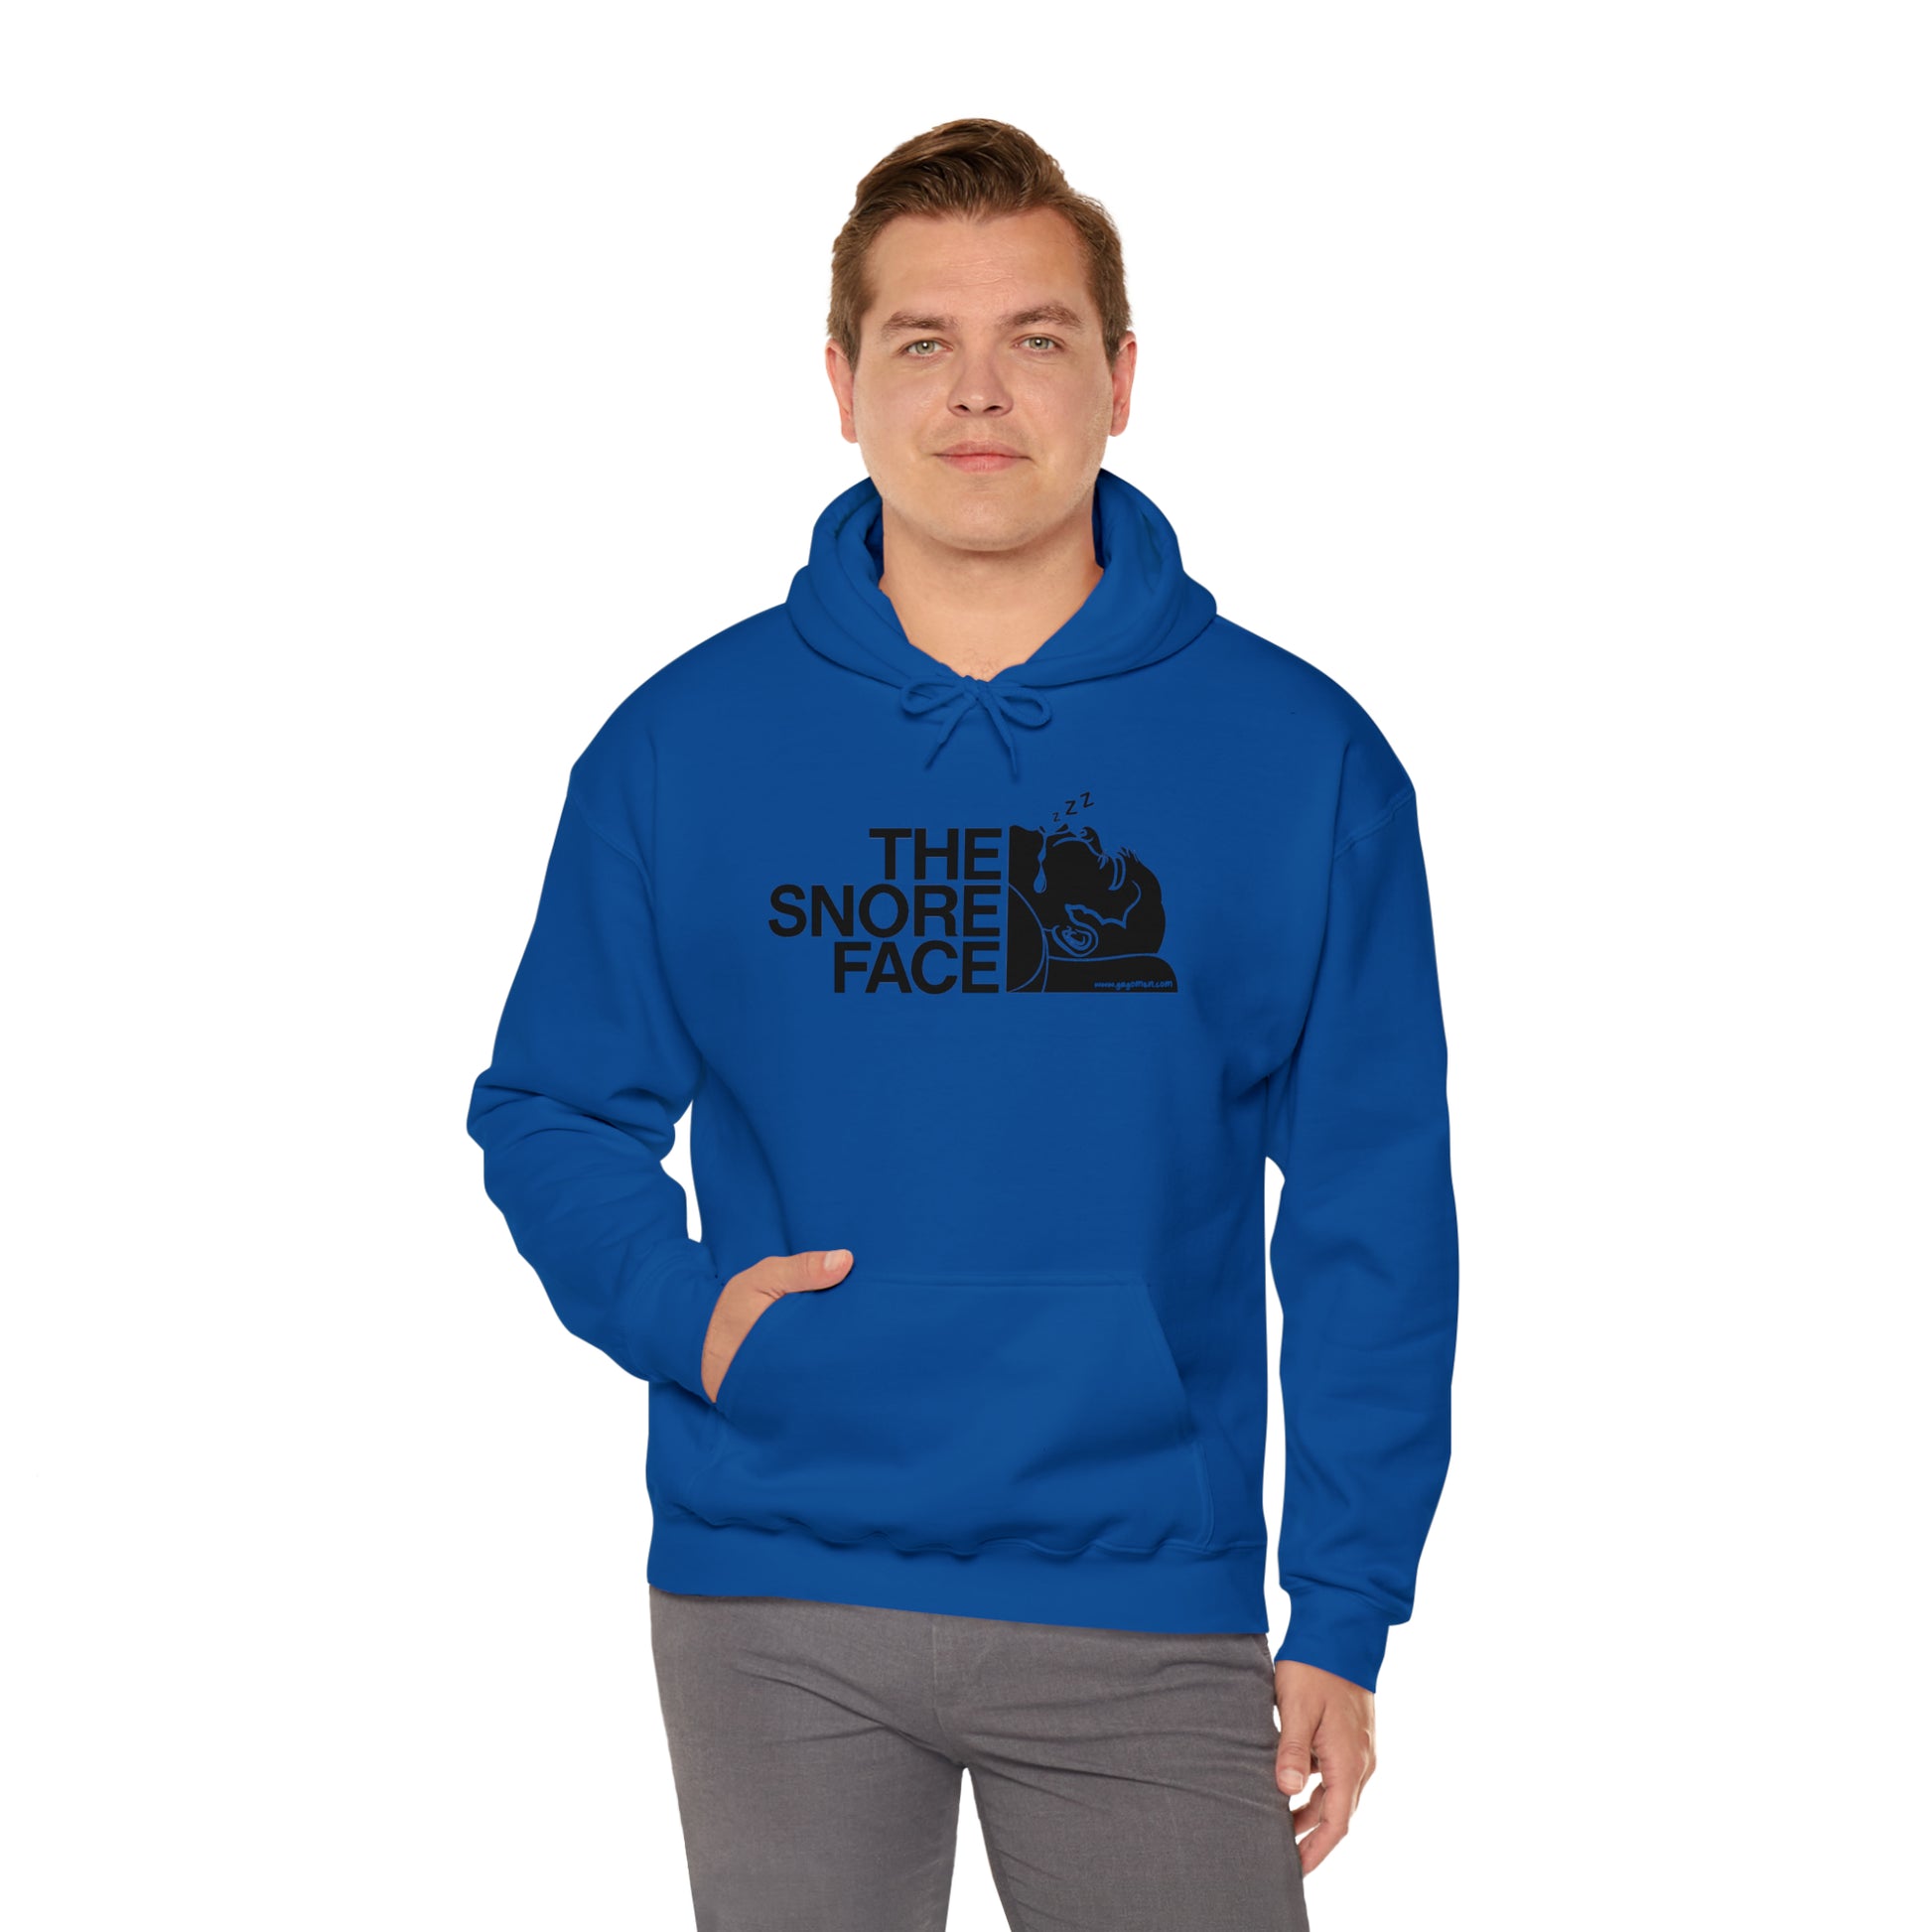 funny the north face hoodie, brand parody hoodie, funny hoodie, parody hoodie, funny outdoor hoodie, funny hiking hoodie, funny camping hoodie, spoof hoodie, meme hoodie, hilarious hoodie, dads gift, funny gift, 